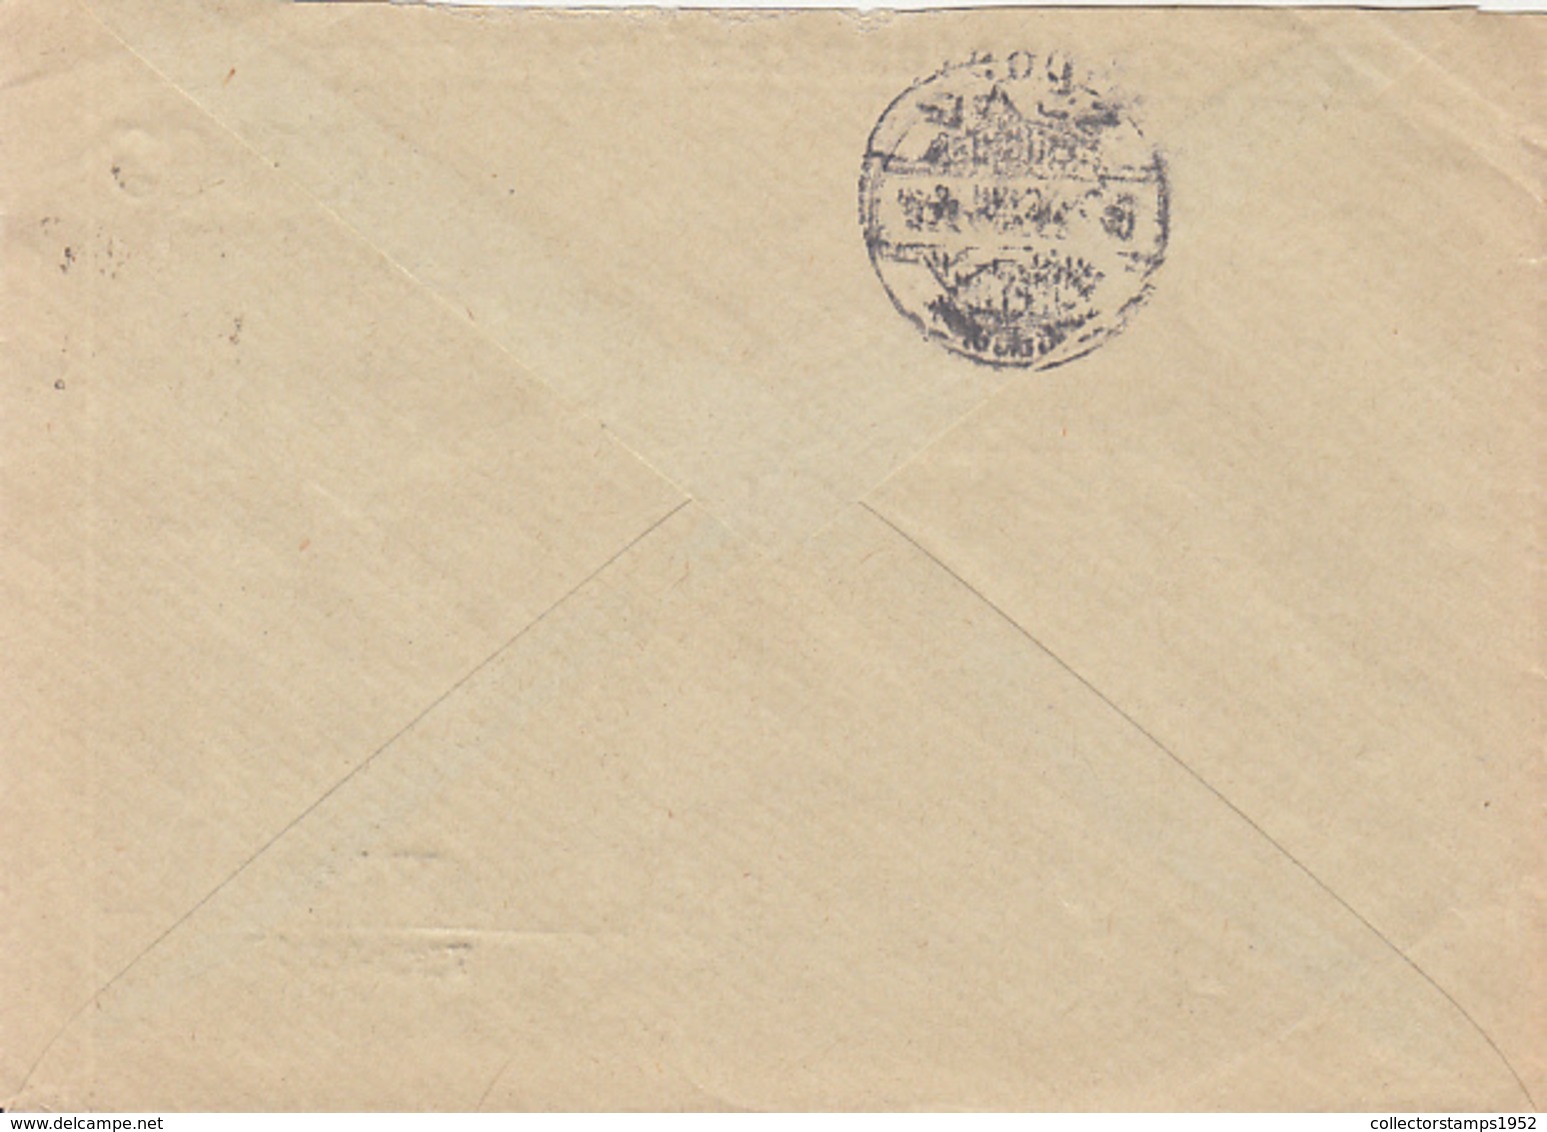 82636- AMOUNT 250 FILLERS OFFICIAL STAMPS ON ENTERPRISE HEADER COVER, 1926, HUNGARY - Servizio